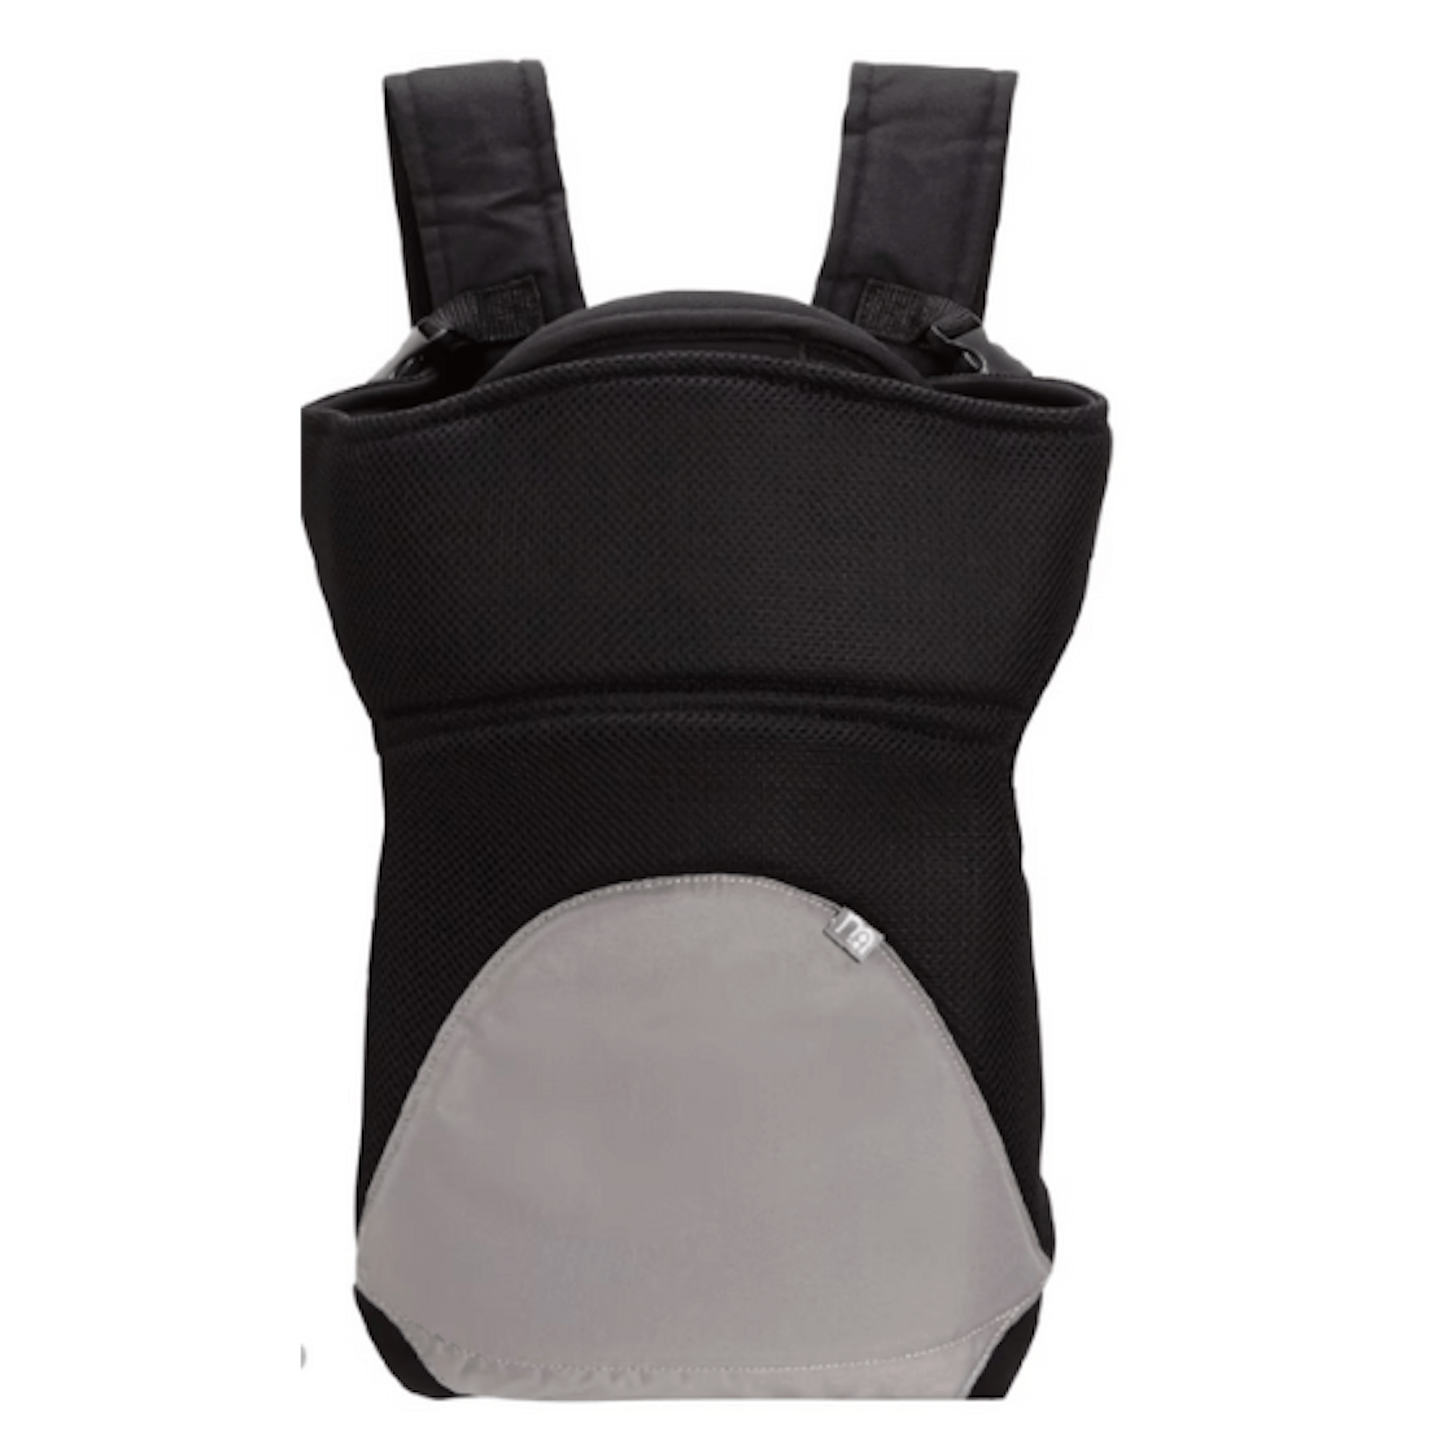 Best baby carrier mother care